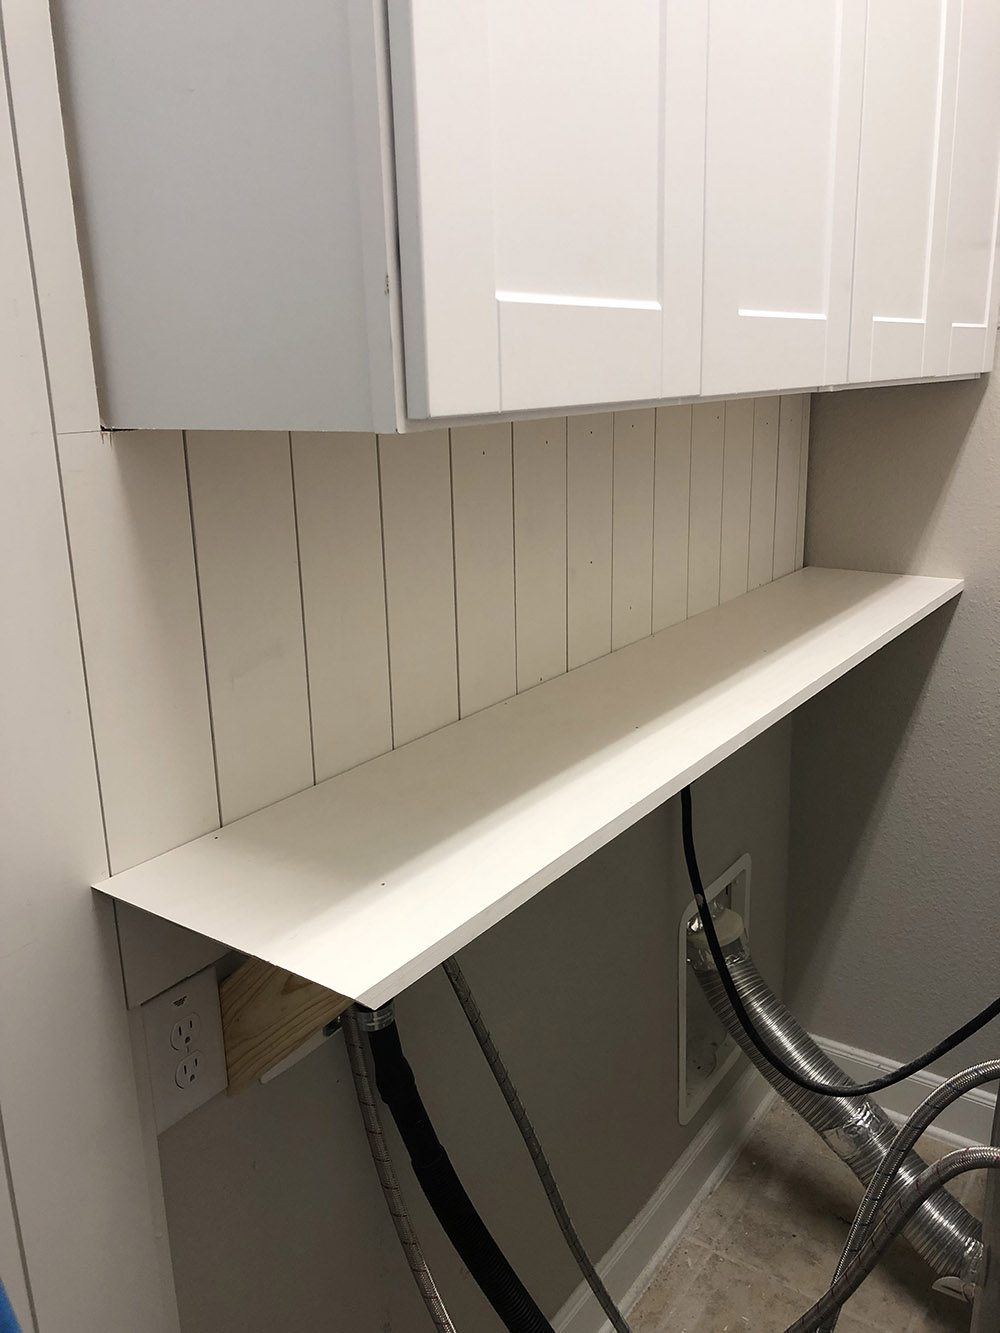 A laundry room wall with a shelf supported by four angled wood supports.